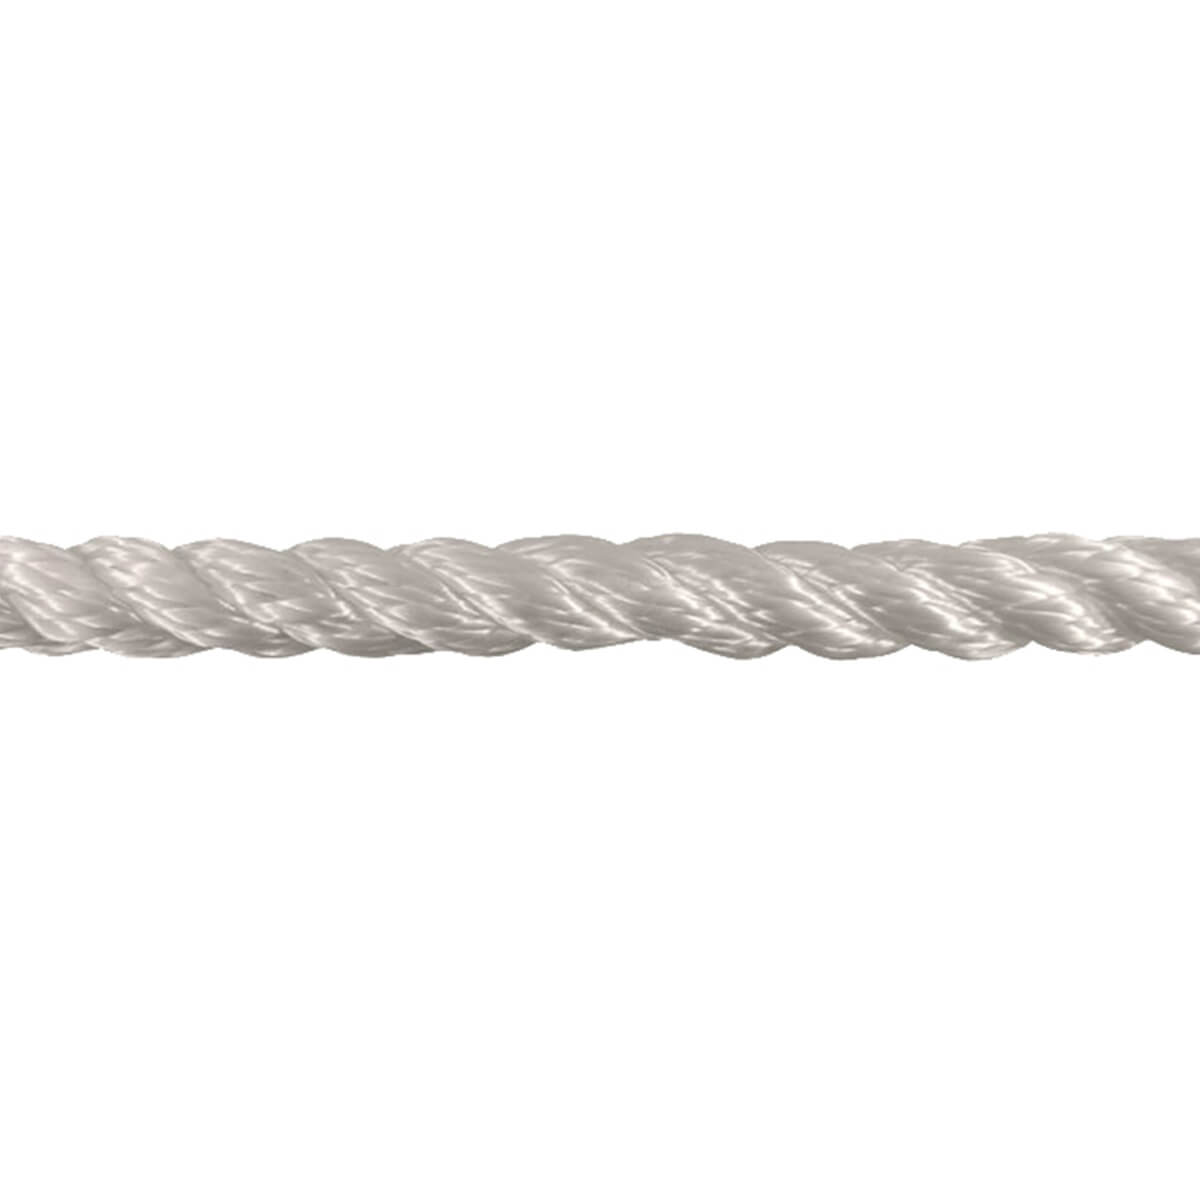 Cotton Twisted Rope - White - 1/2-in - Price Per ft